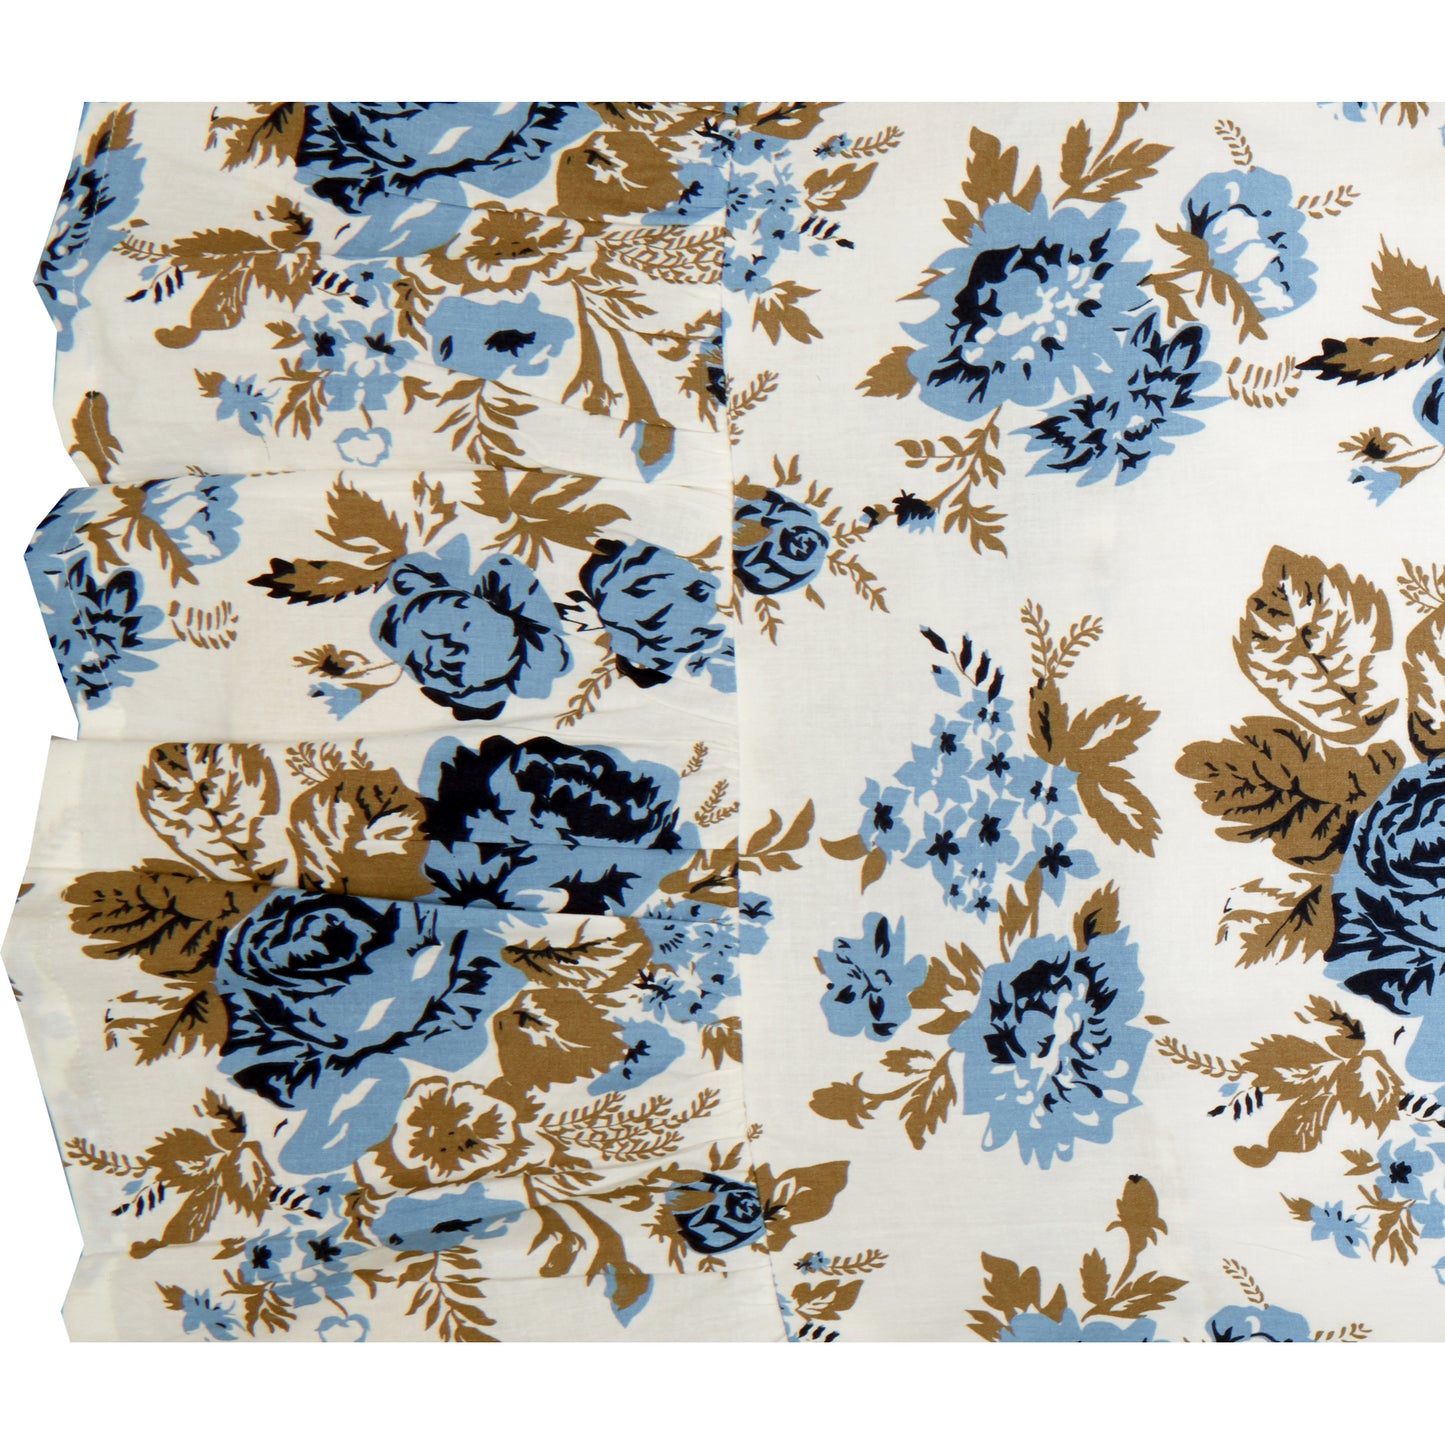 70001-Annie-Blue-Floral-Ruffled-Standard-Pillow-Case-Set-of-2-21x26-8-image-6